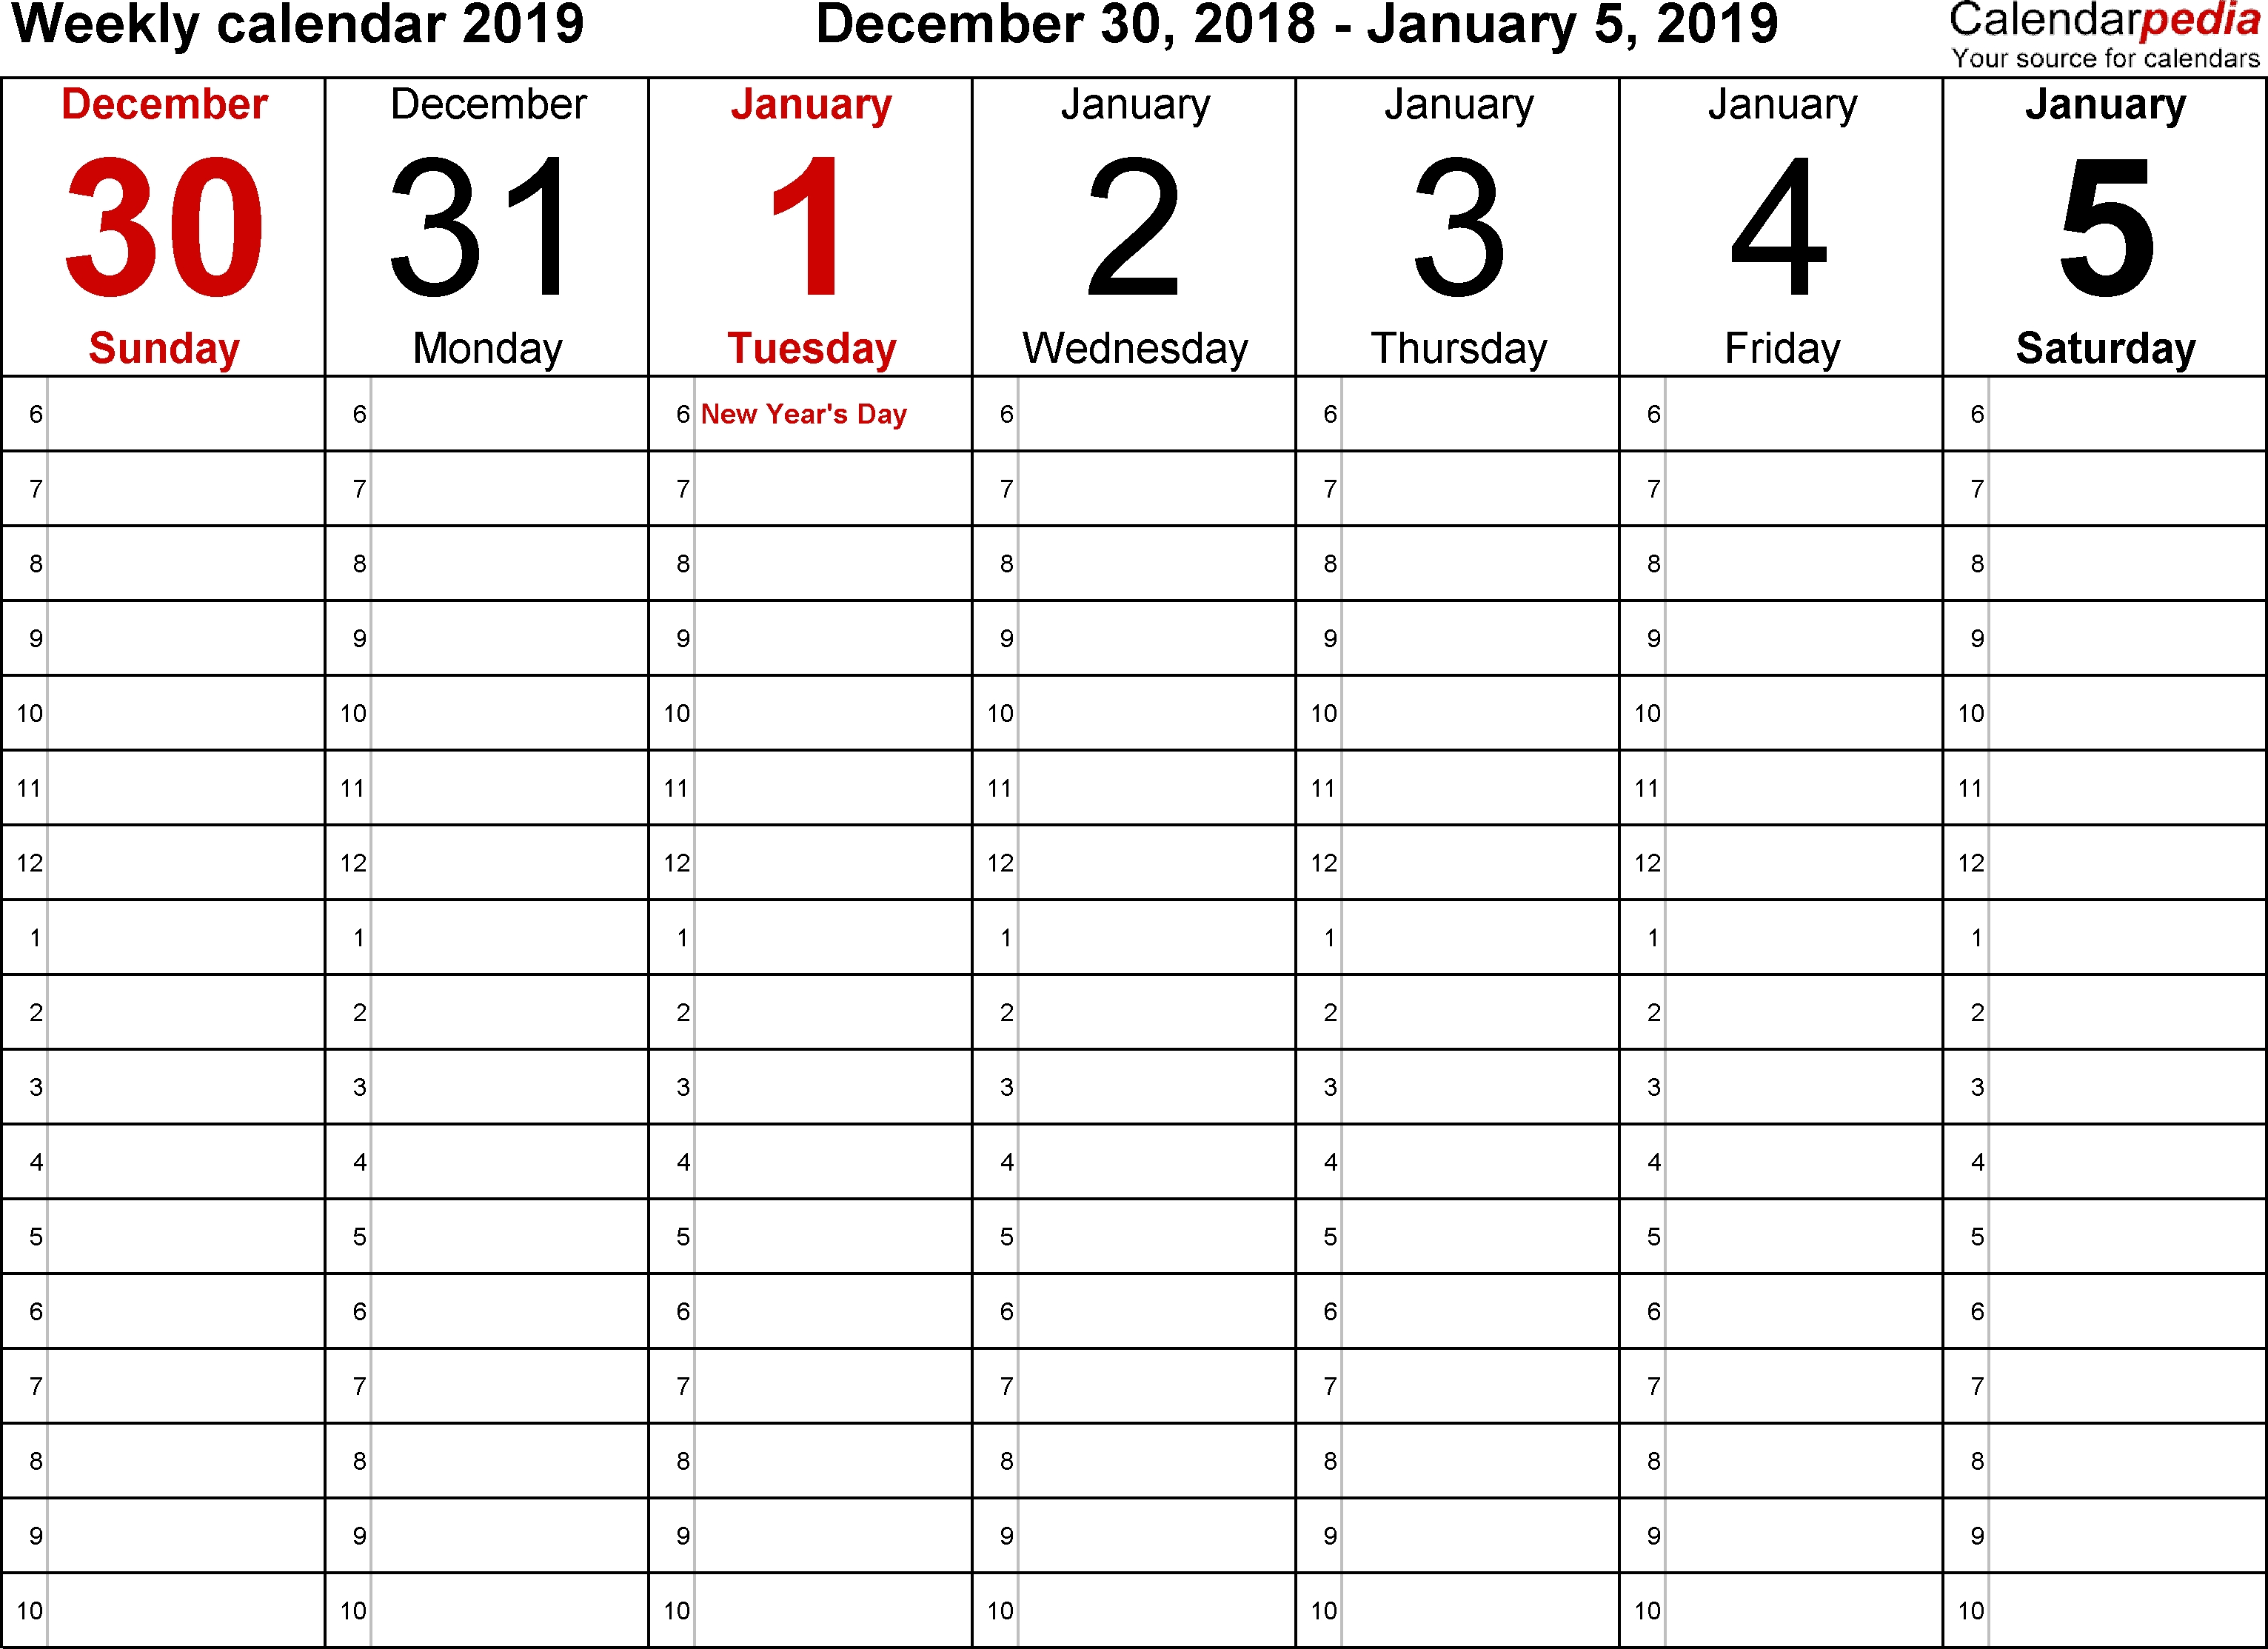 Weekly Calendar 2019 For Word - 12 Free Printable Templates within Free Template For Weekly Schedule